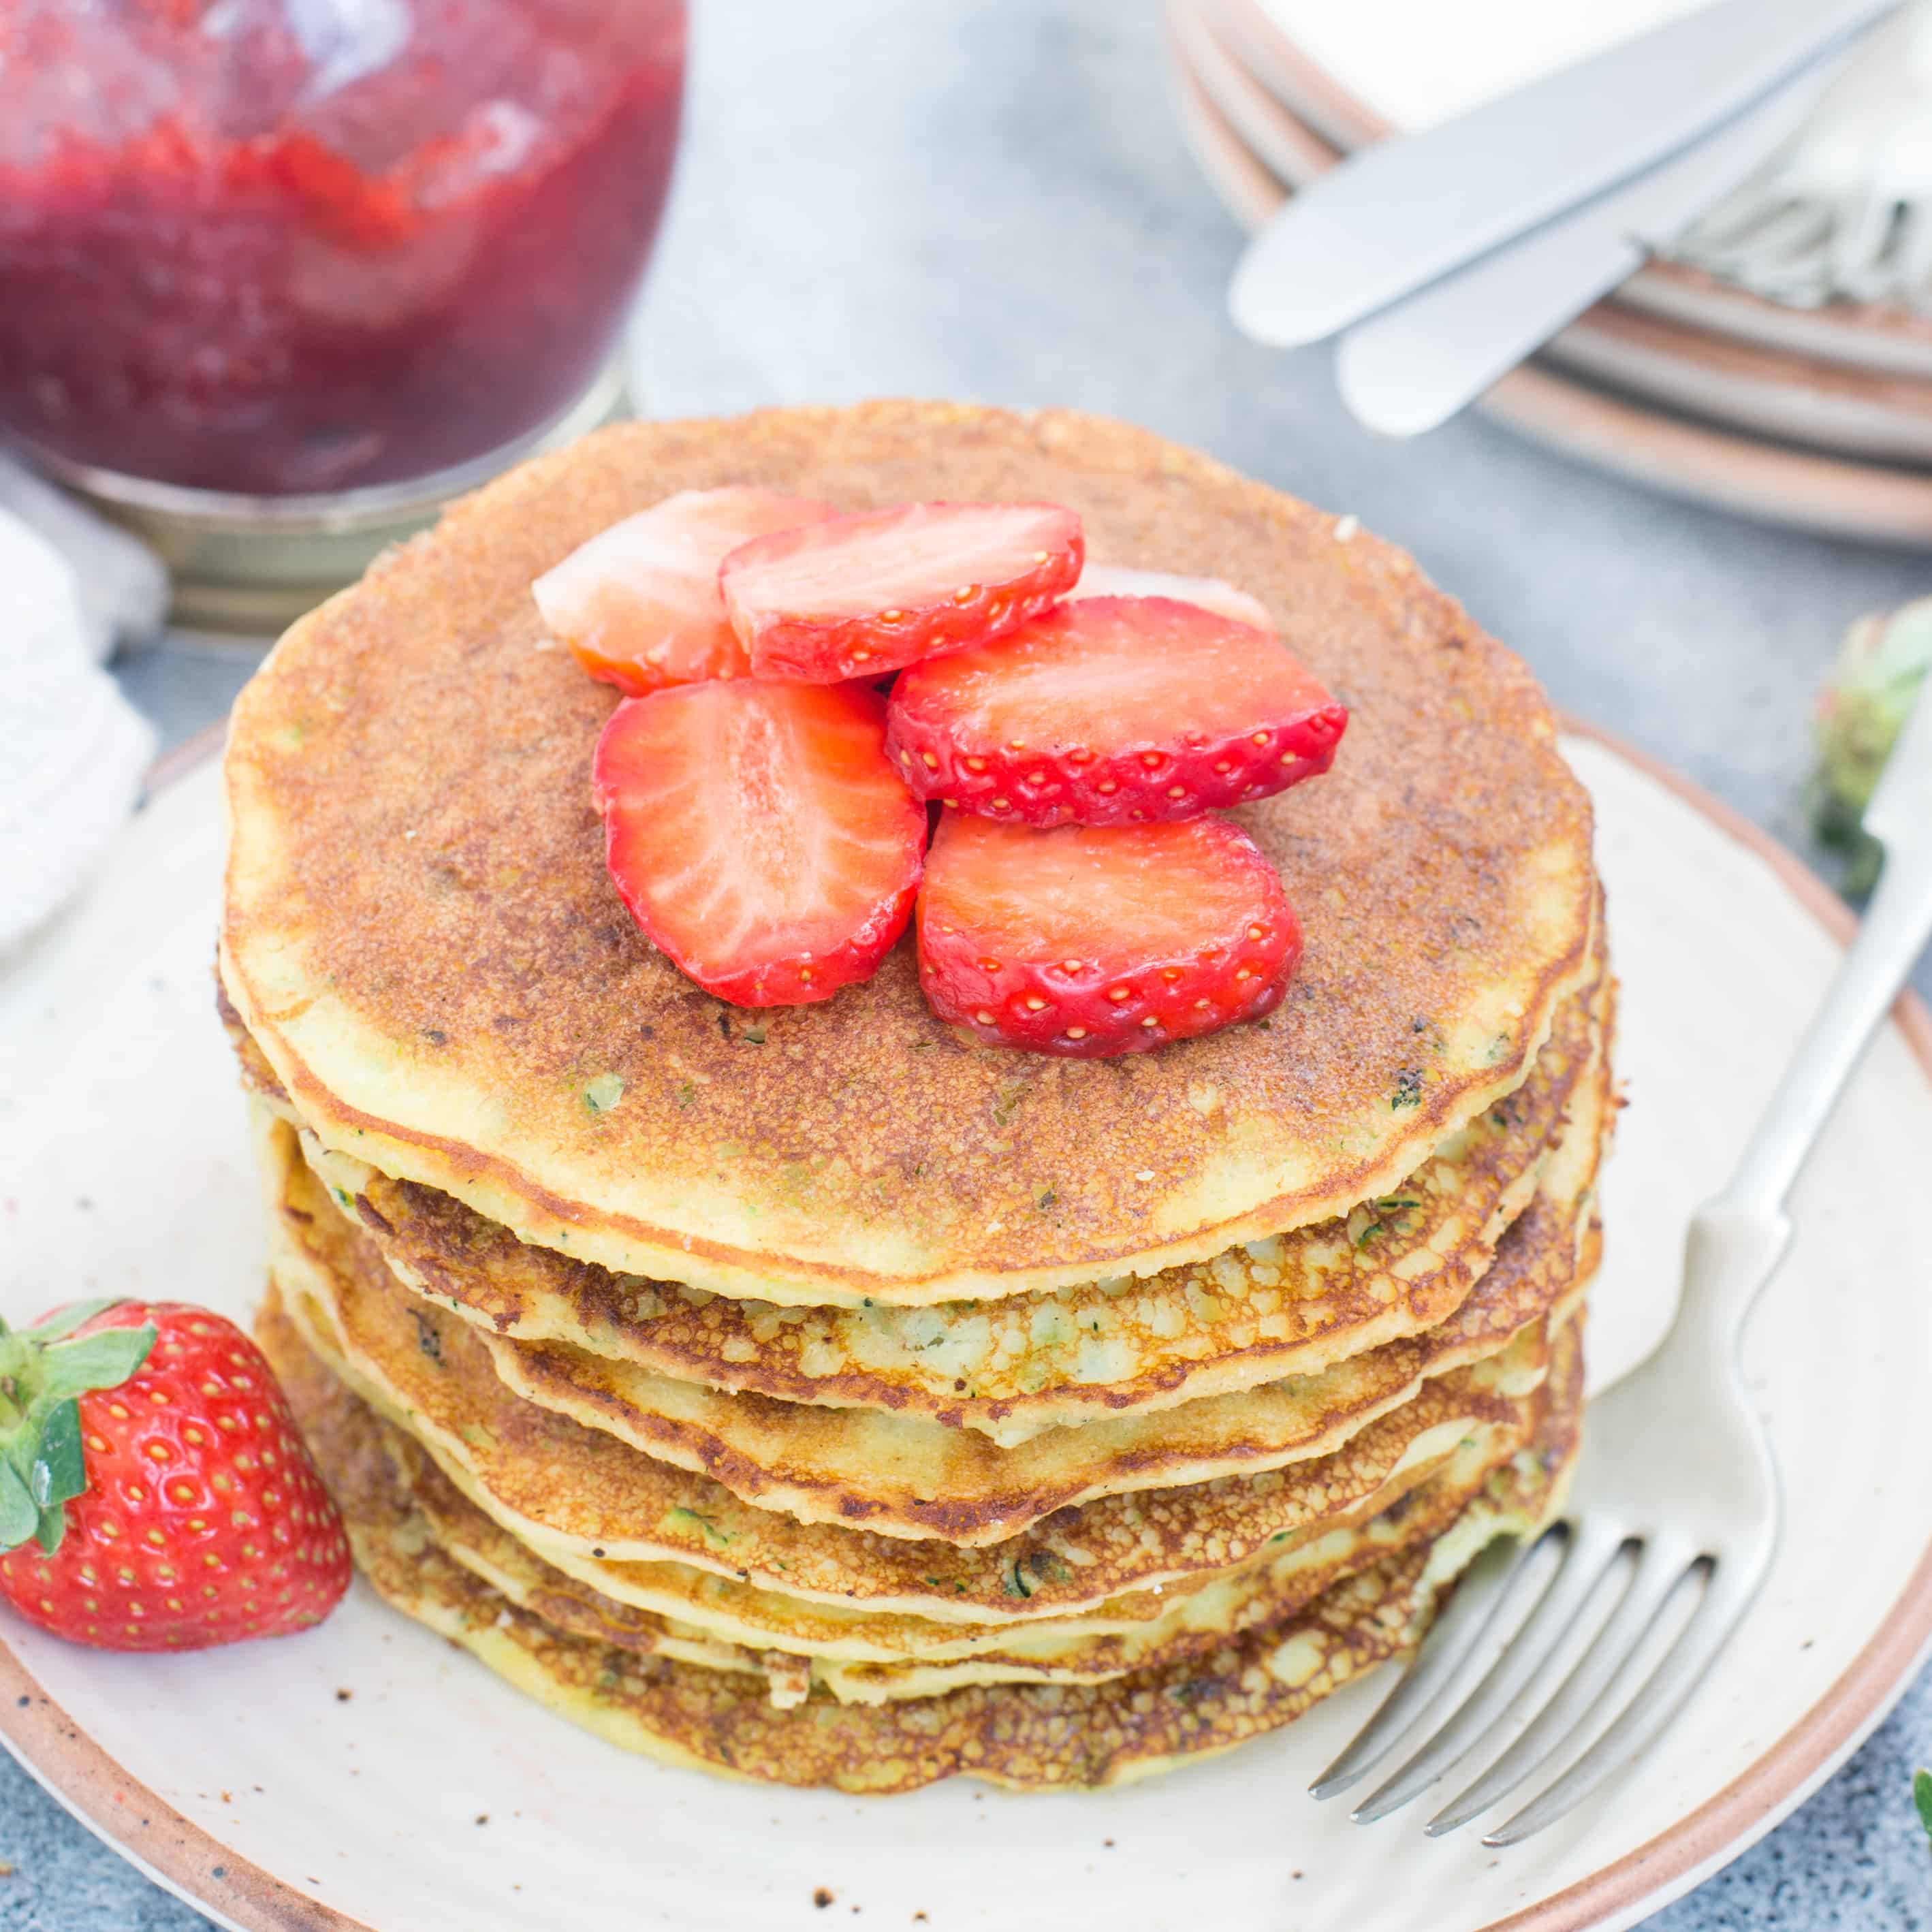 These  Low Carb Coconut Flour Pancakes with Cream cheese and zucchini are fluffy, delicious and Keto friendly. Top these pancakes with fresh berries or Honey(Non-Keto) for a delicious breakfast.